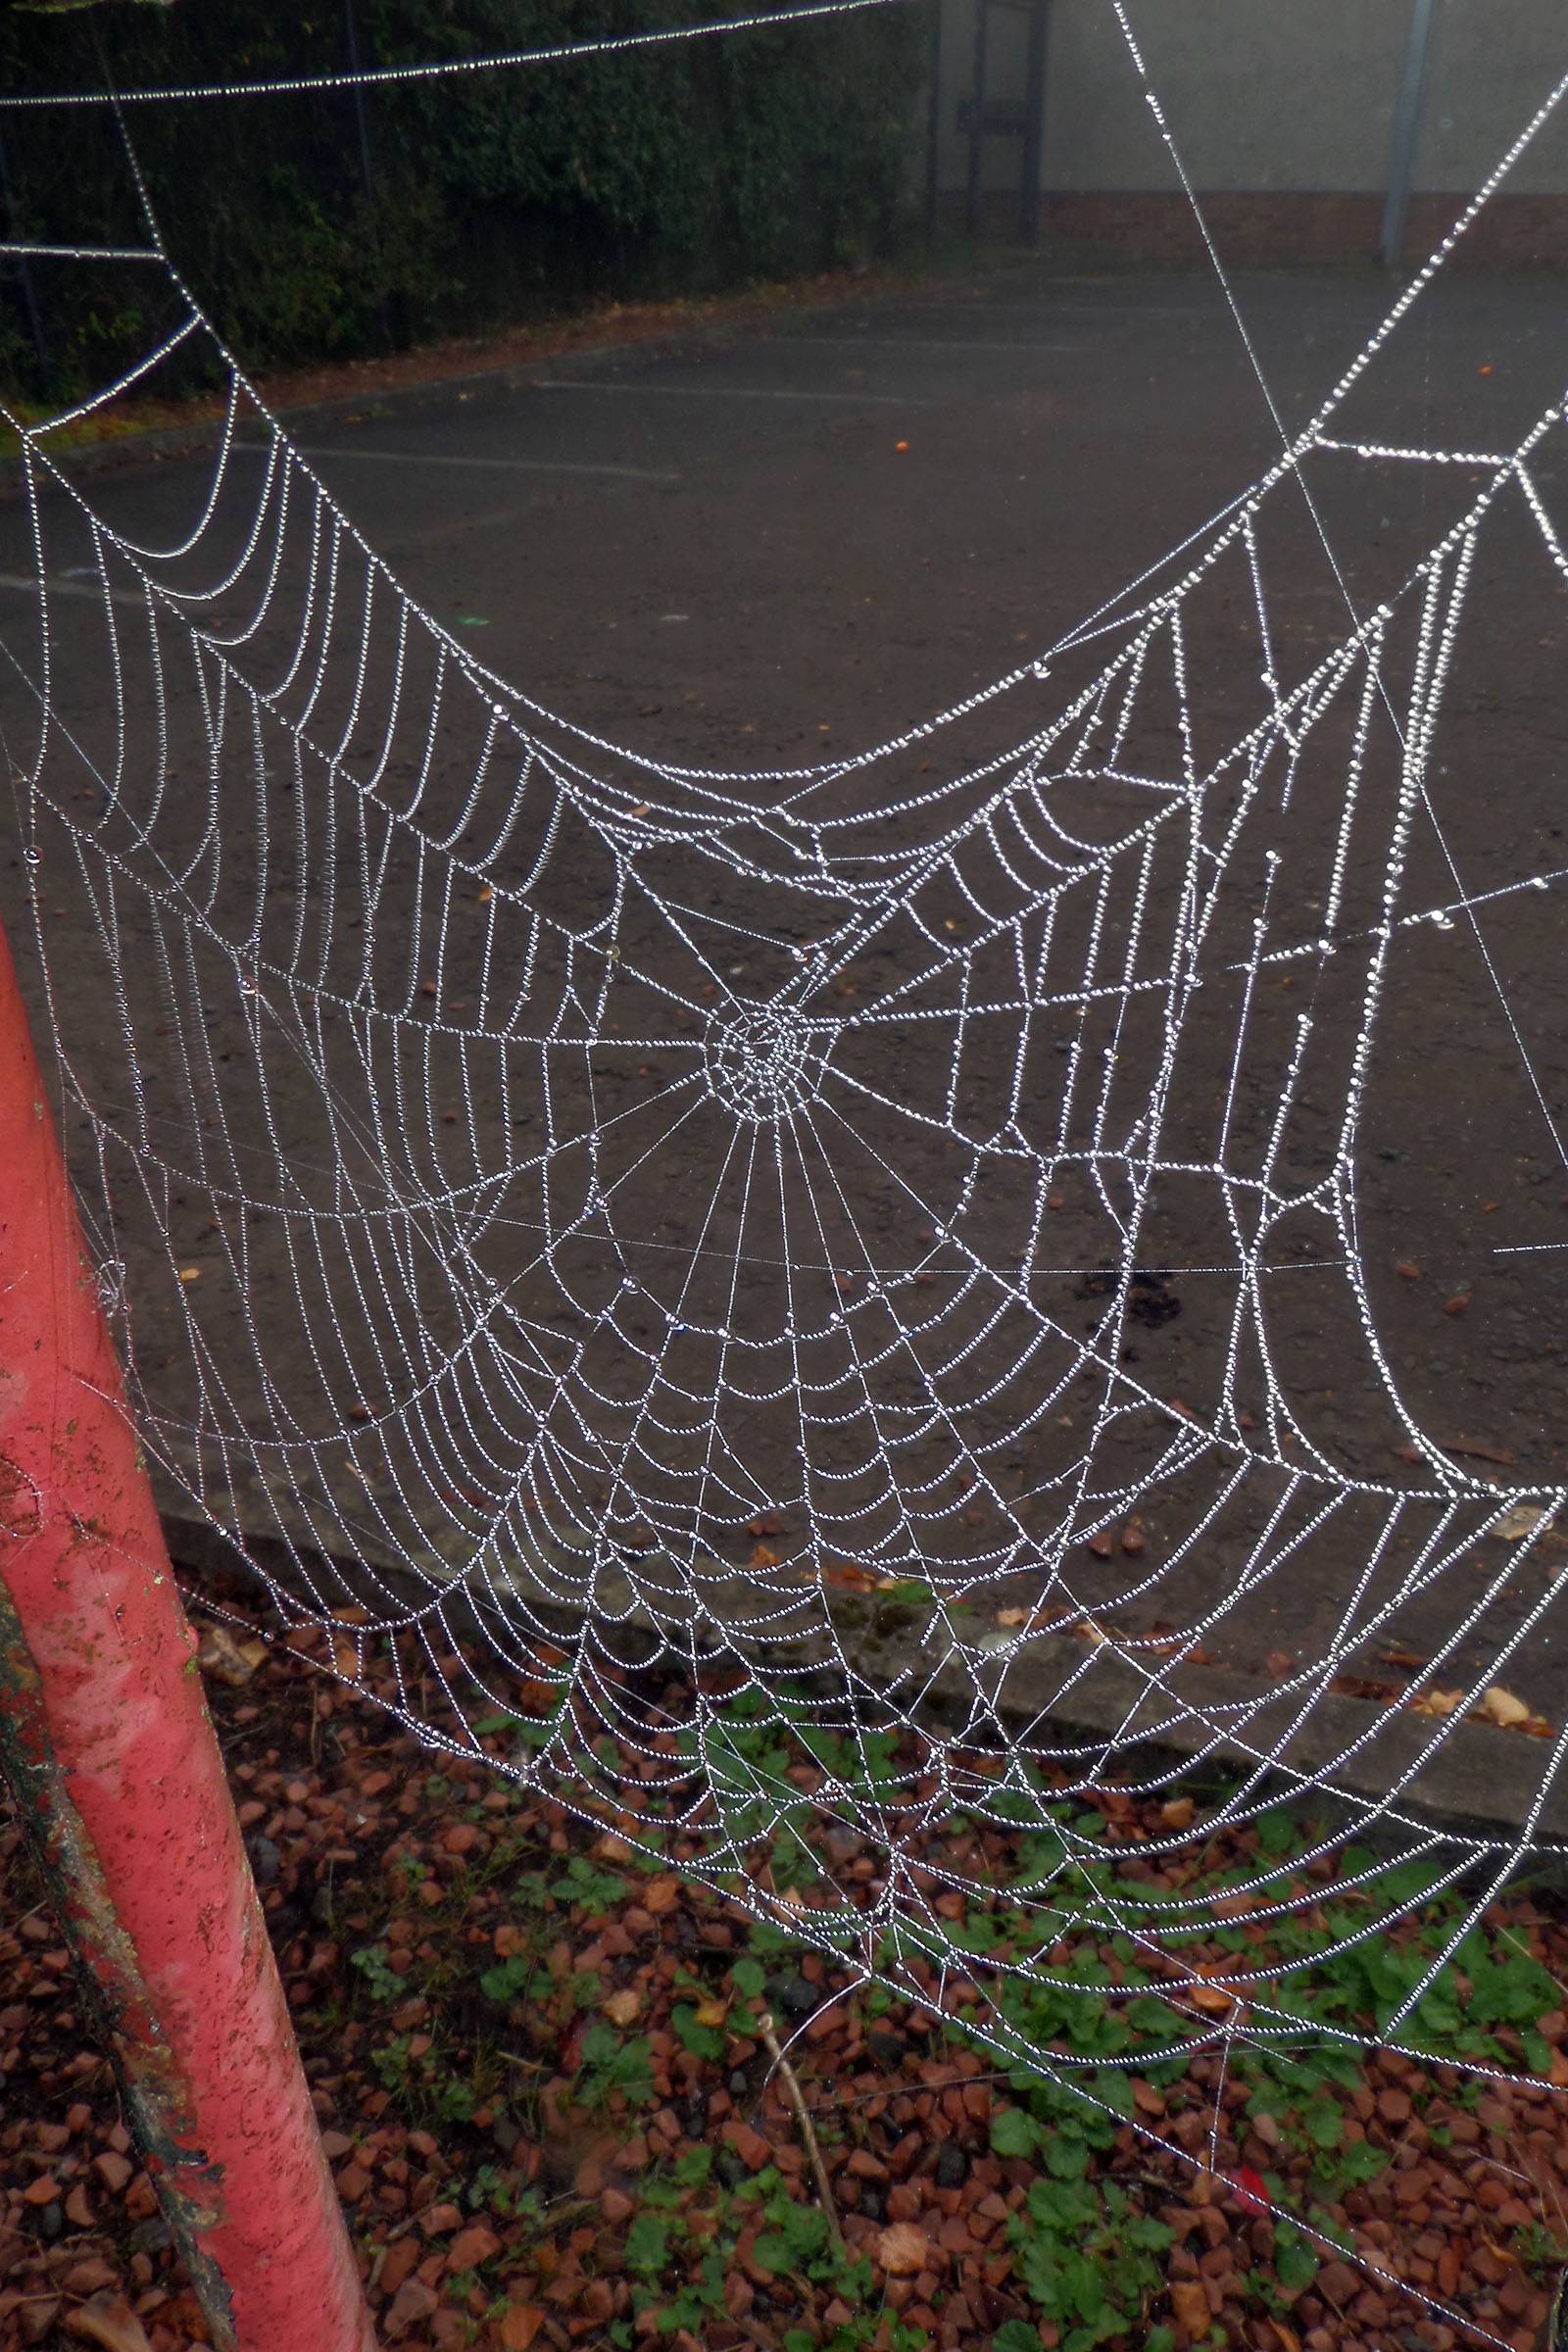 Dew drops on spider's web photo